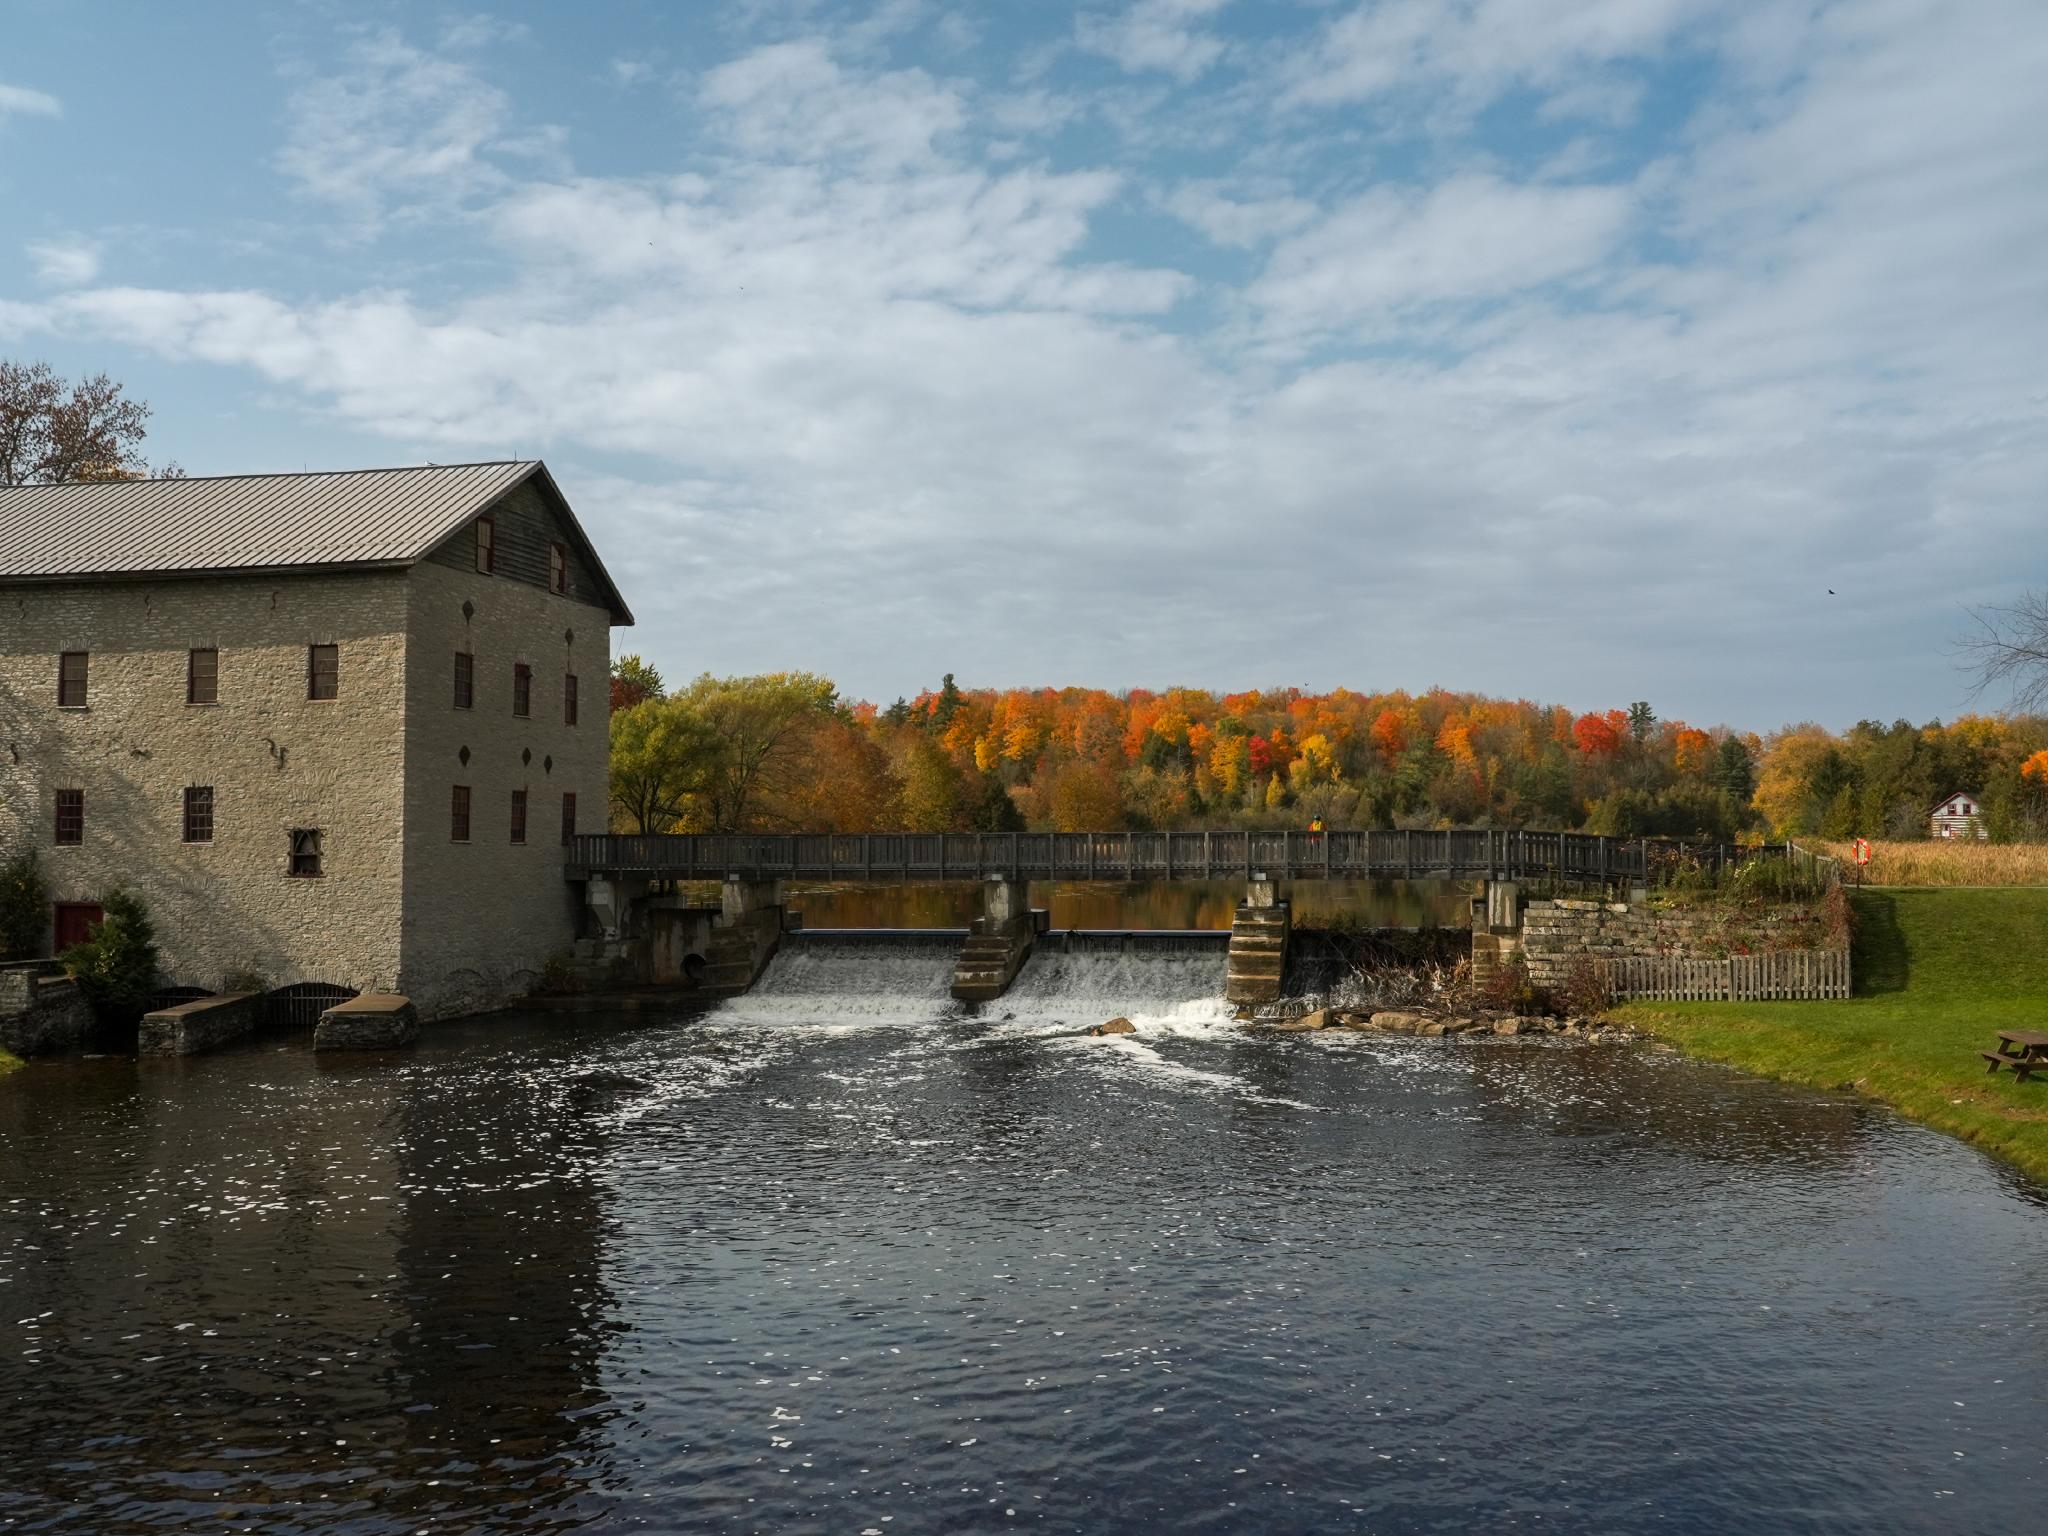 Stone mill with fall trees in the background